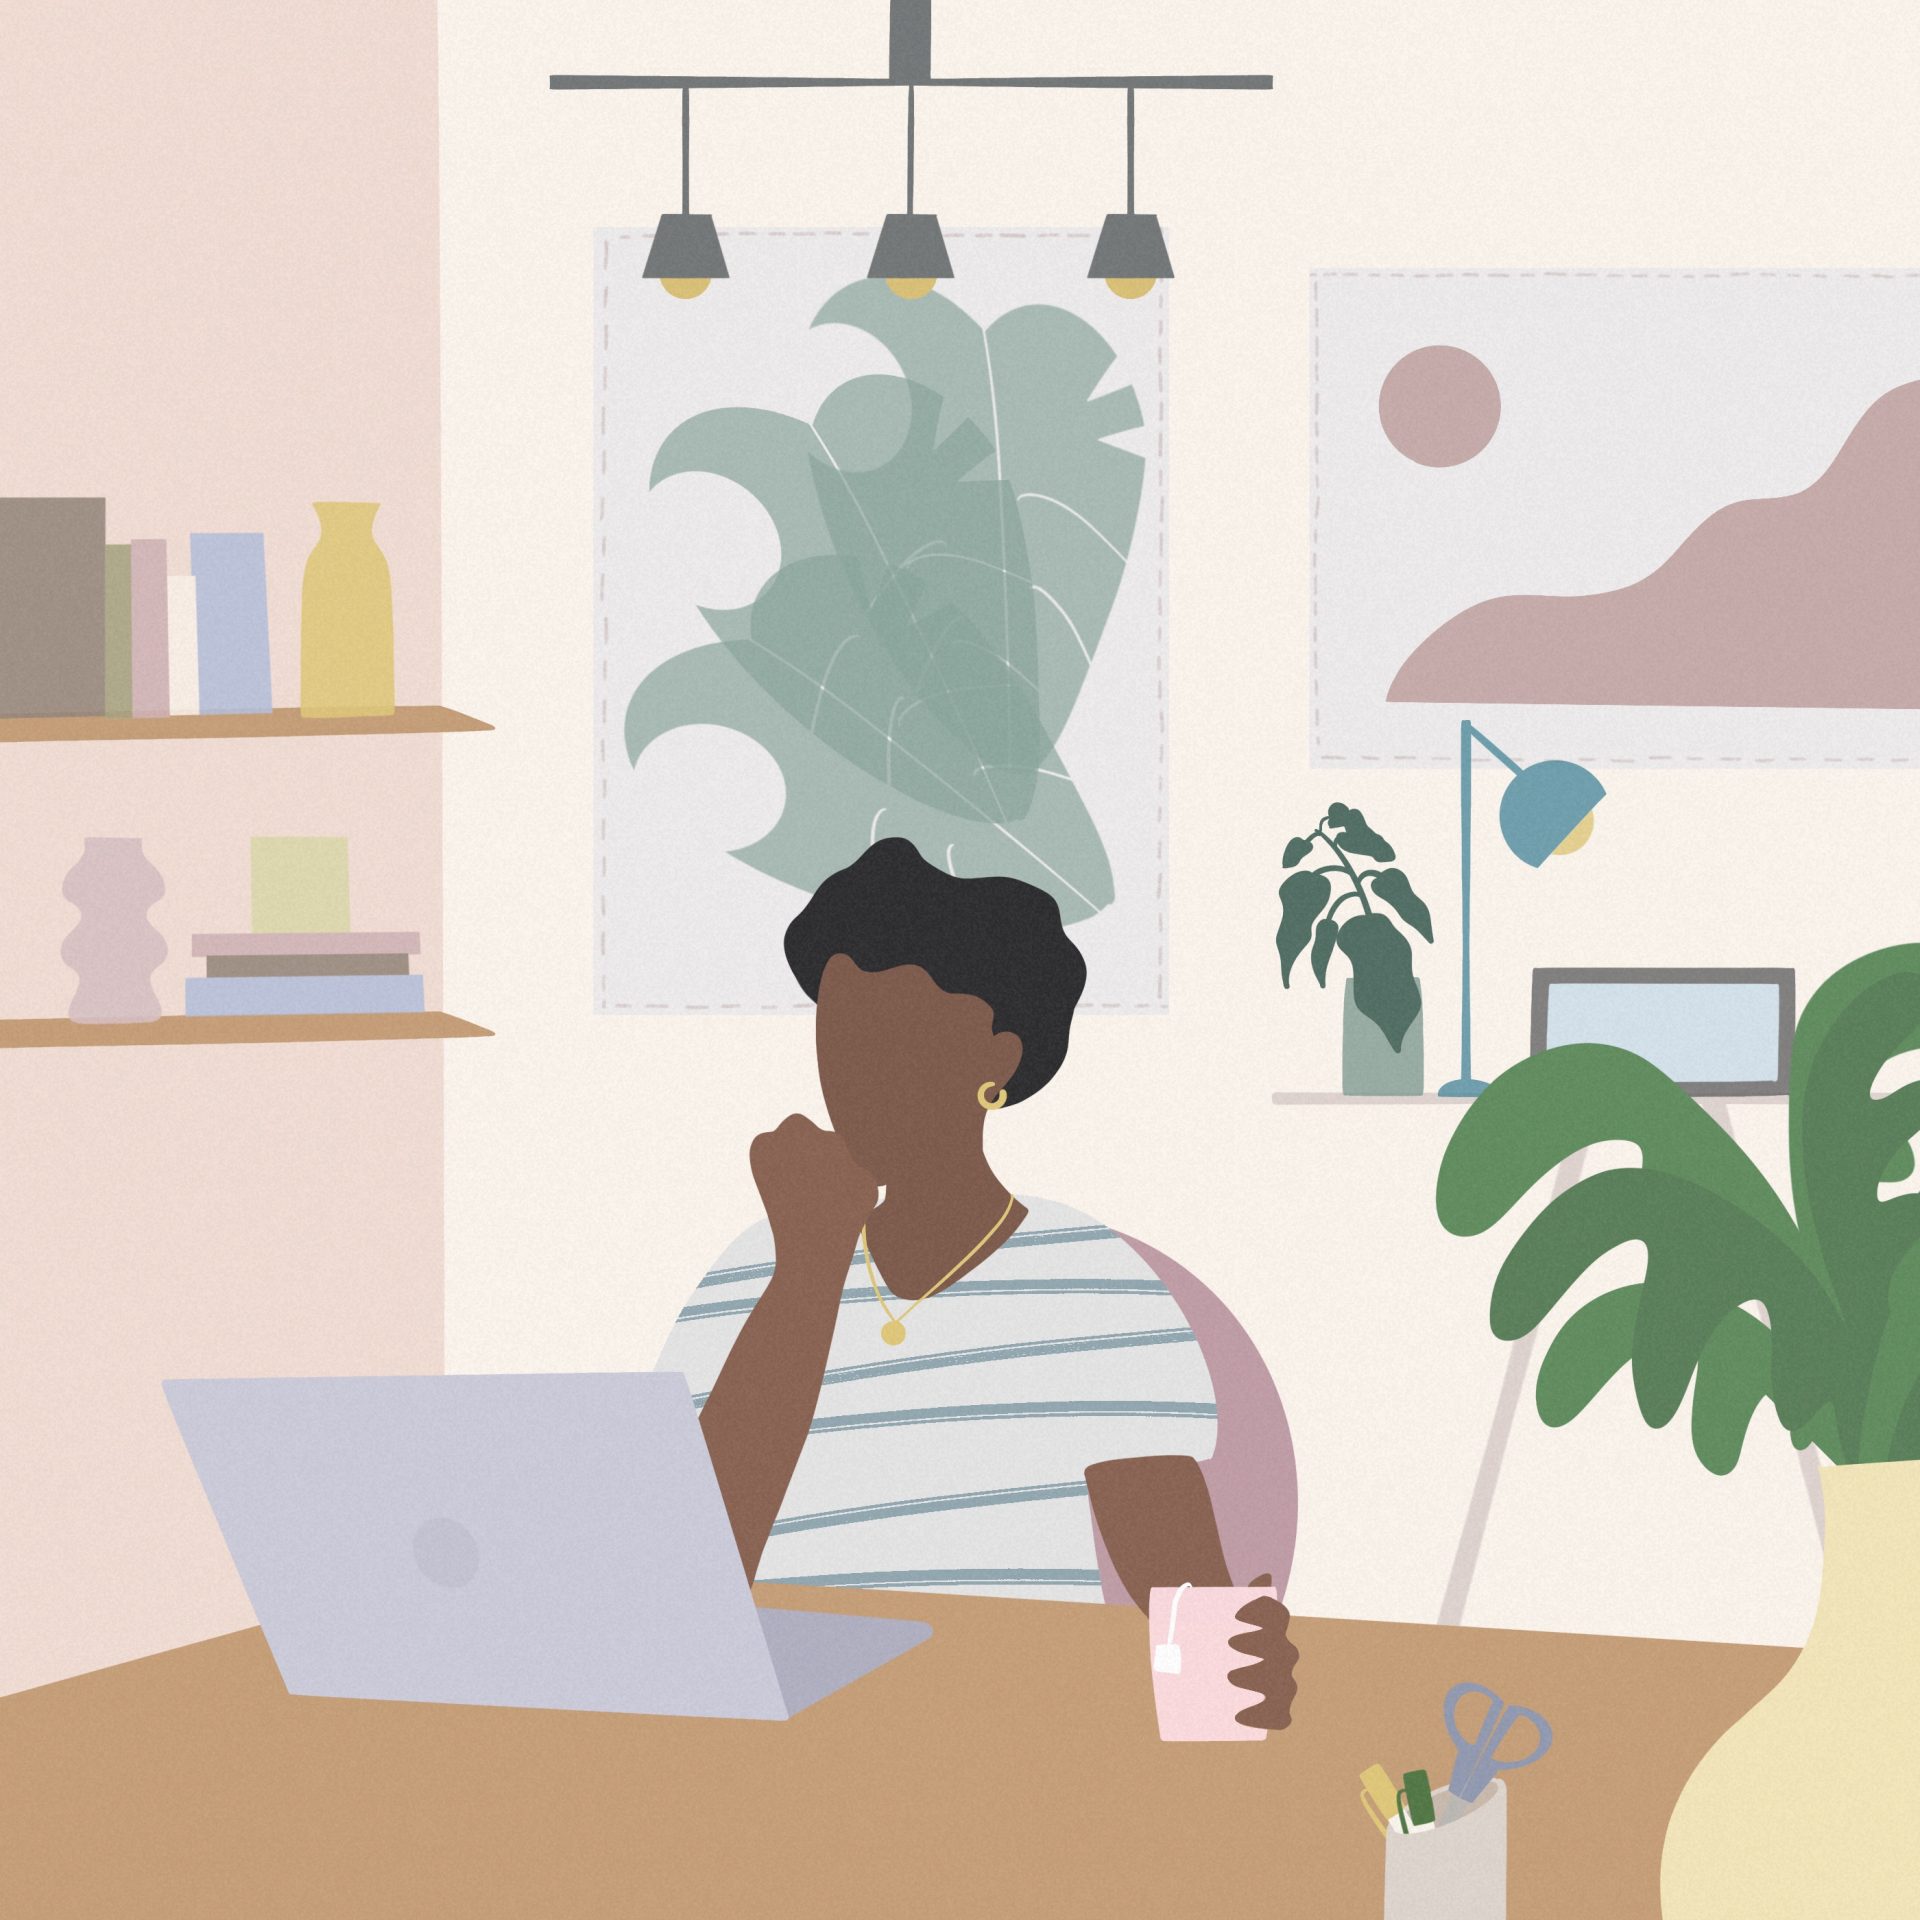 We need to talk about loneliness while working from home